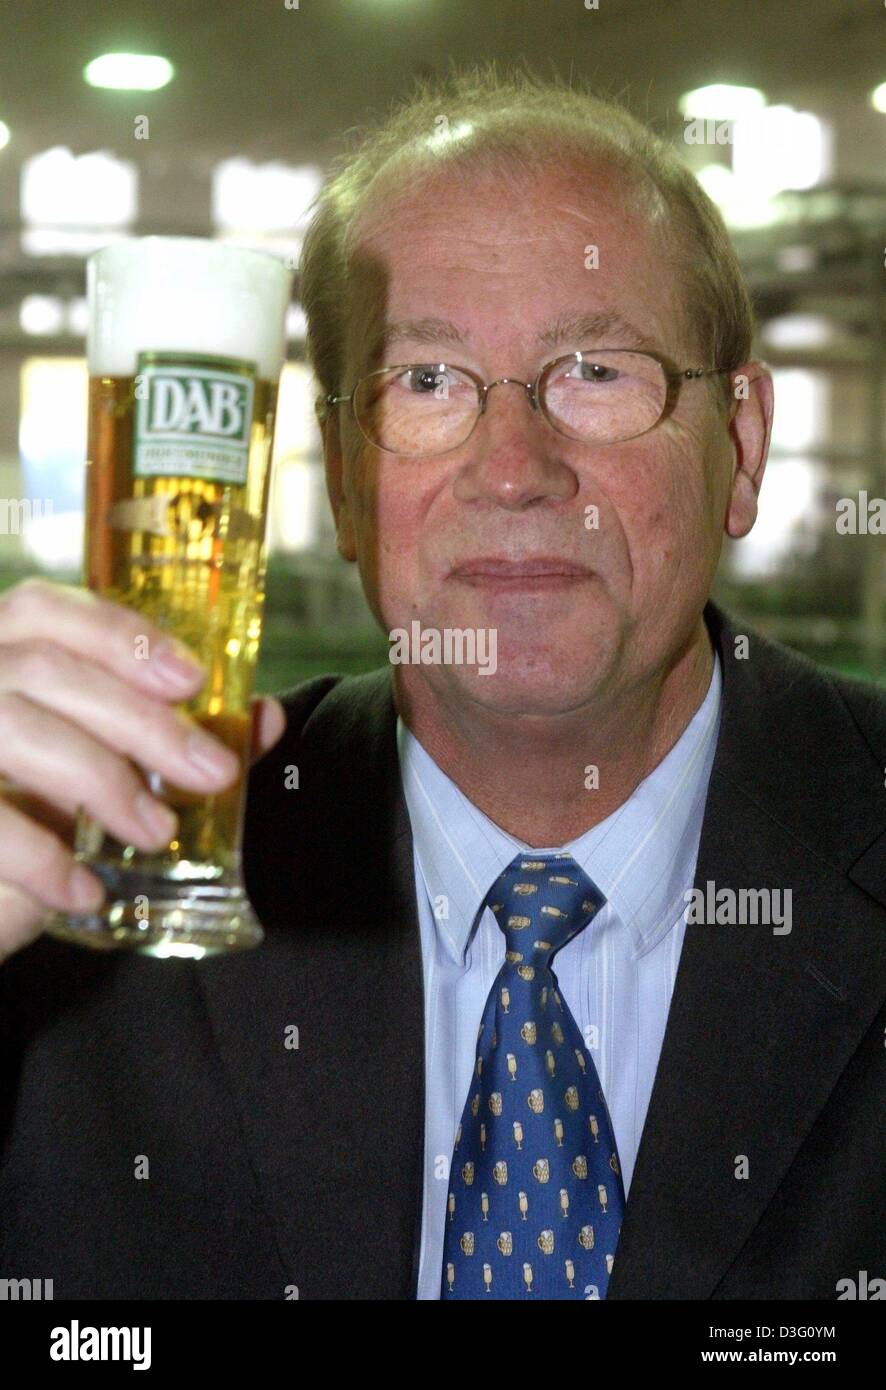 (dpa) - Ulrich Kallmeyer, Chairman of the Radeberger brewery group cheers with a glass of beer in the filling department at the DAB Brewery, which belongs ... - dpa-ulrich-kallmeyer-chairman-of-the-radeberger-brewery-group-cheers-D3G0YM